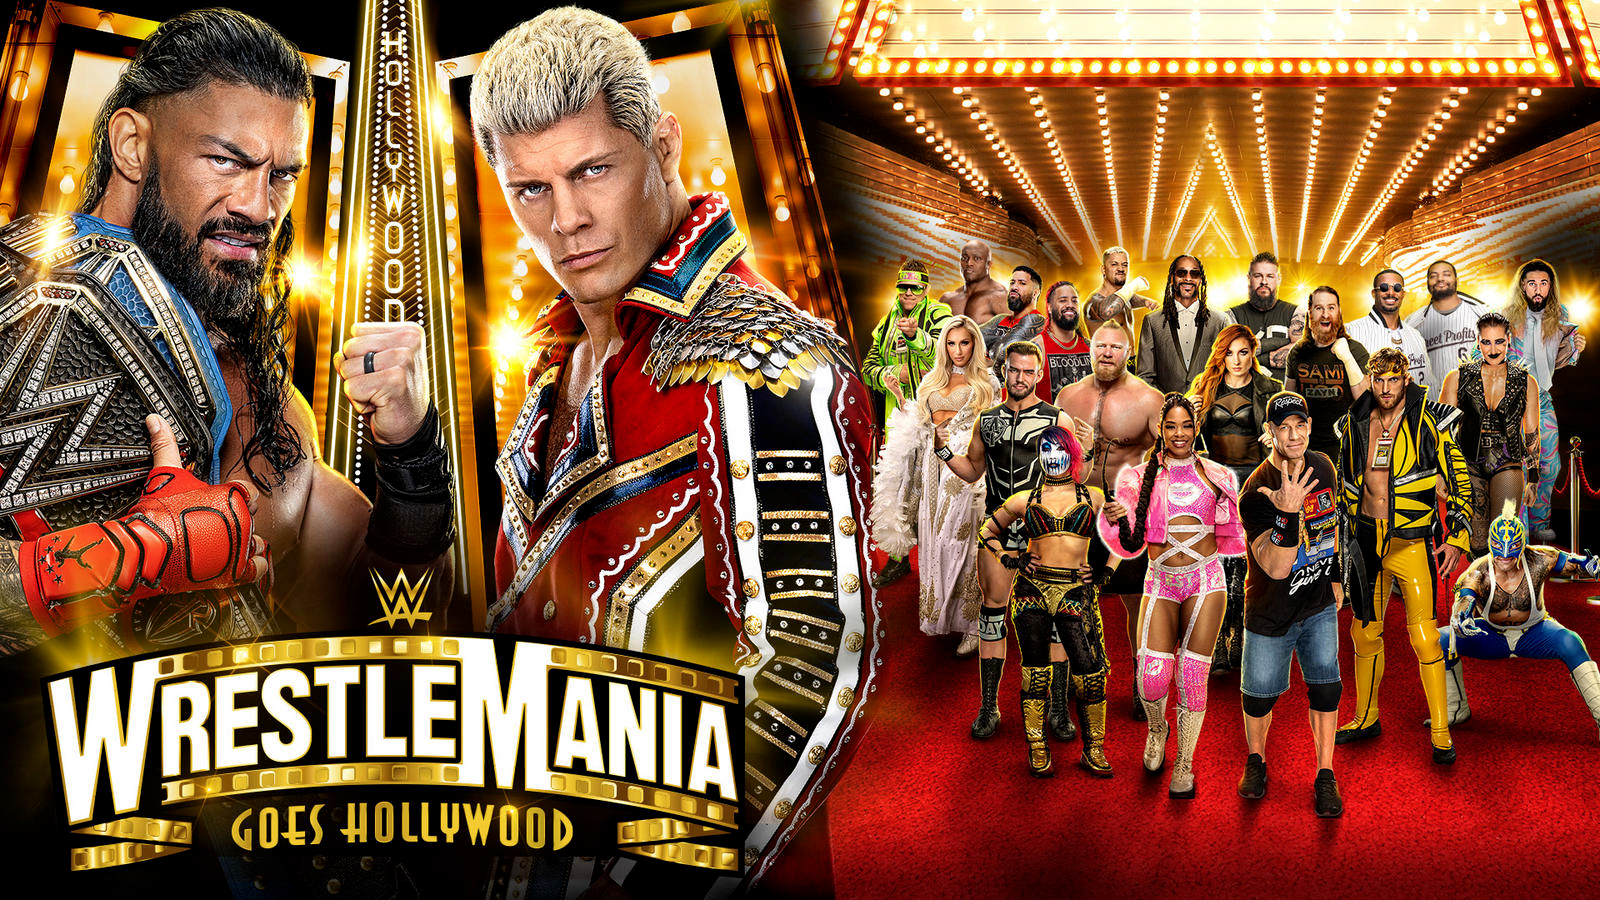 WWE Wrestlemania 39 "Goes Hollywood"  On left, the Undisputed WWE Universal Champion Roman Reigns and Cody Rhodes which is the main event of Night 2.   On the right are other WWE superstars & celebrities  (From Back left) The Miz, Bobby Lashley, The Undisputed WWE Tag Team Champions Jimmy and Jey Uso, Solo Sikoa, Snoop Dog, Kevin Owens, Sami Zayn, Montez Ford & Angelo Dawkins of The Street Profits, Seth 'Freakin' Rollins, SmackDown Women's Champion Charlotte Flair, Brock Lesnar, 1/2 of the WWE Women's Tag Team Champions Becky Lynch, Rhea Ripley, The United States Champion Austin Theory, Logan Paul, Rey Mysterio, Asuka, The RAW Women's Champion Bianca Belair and John Cena.